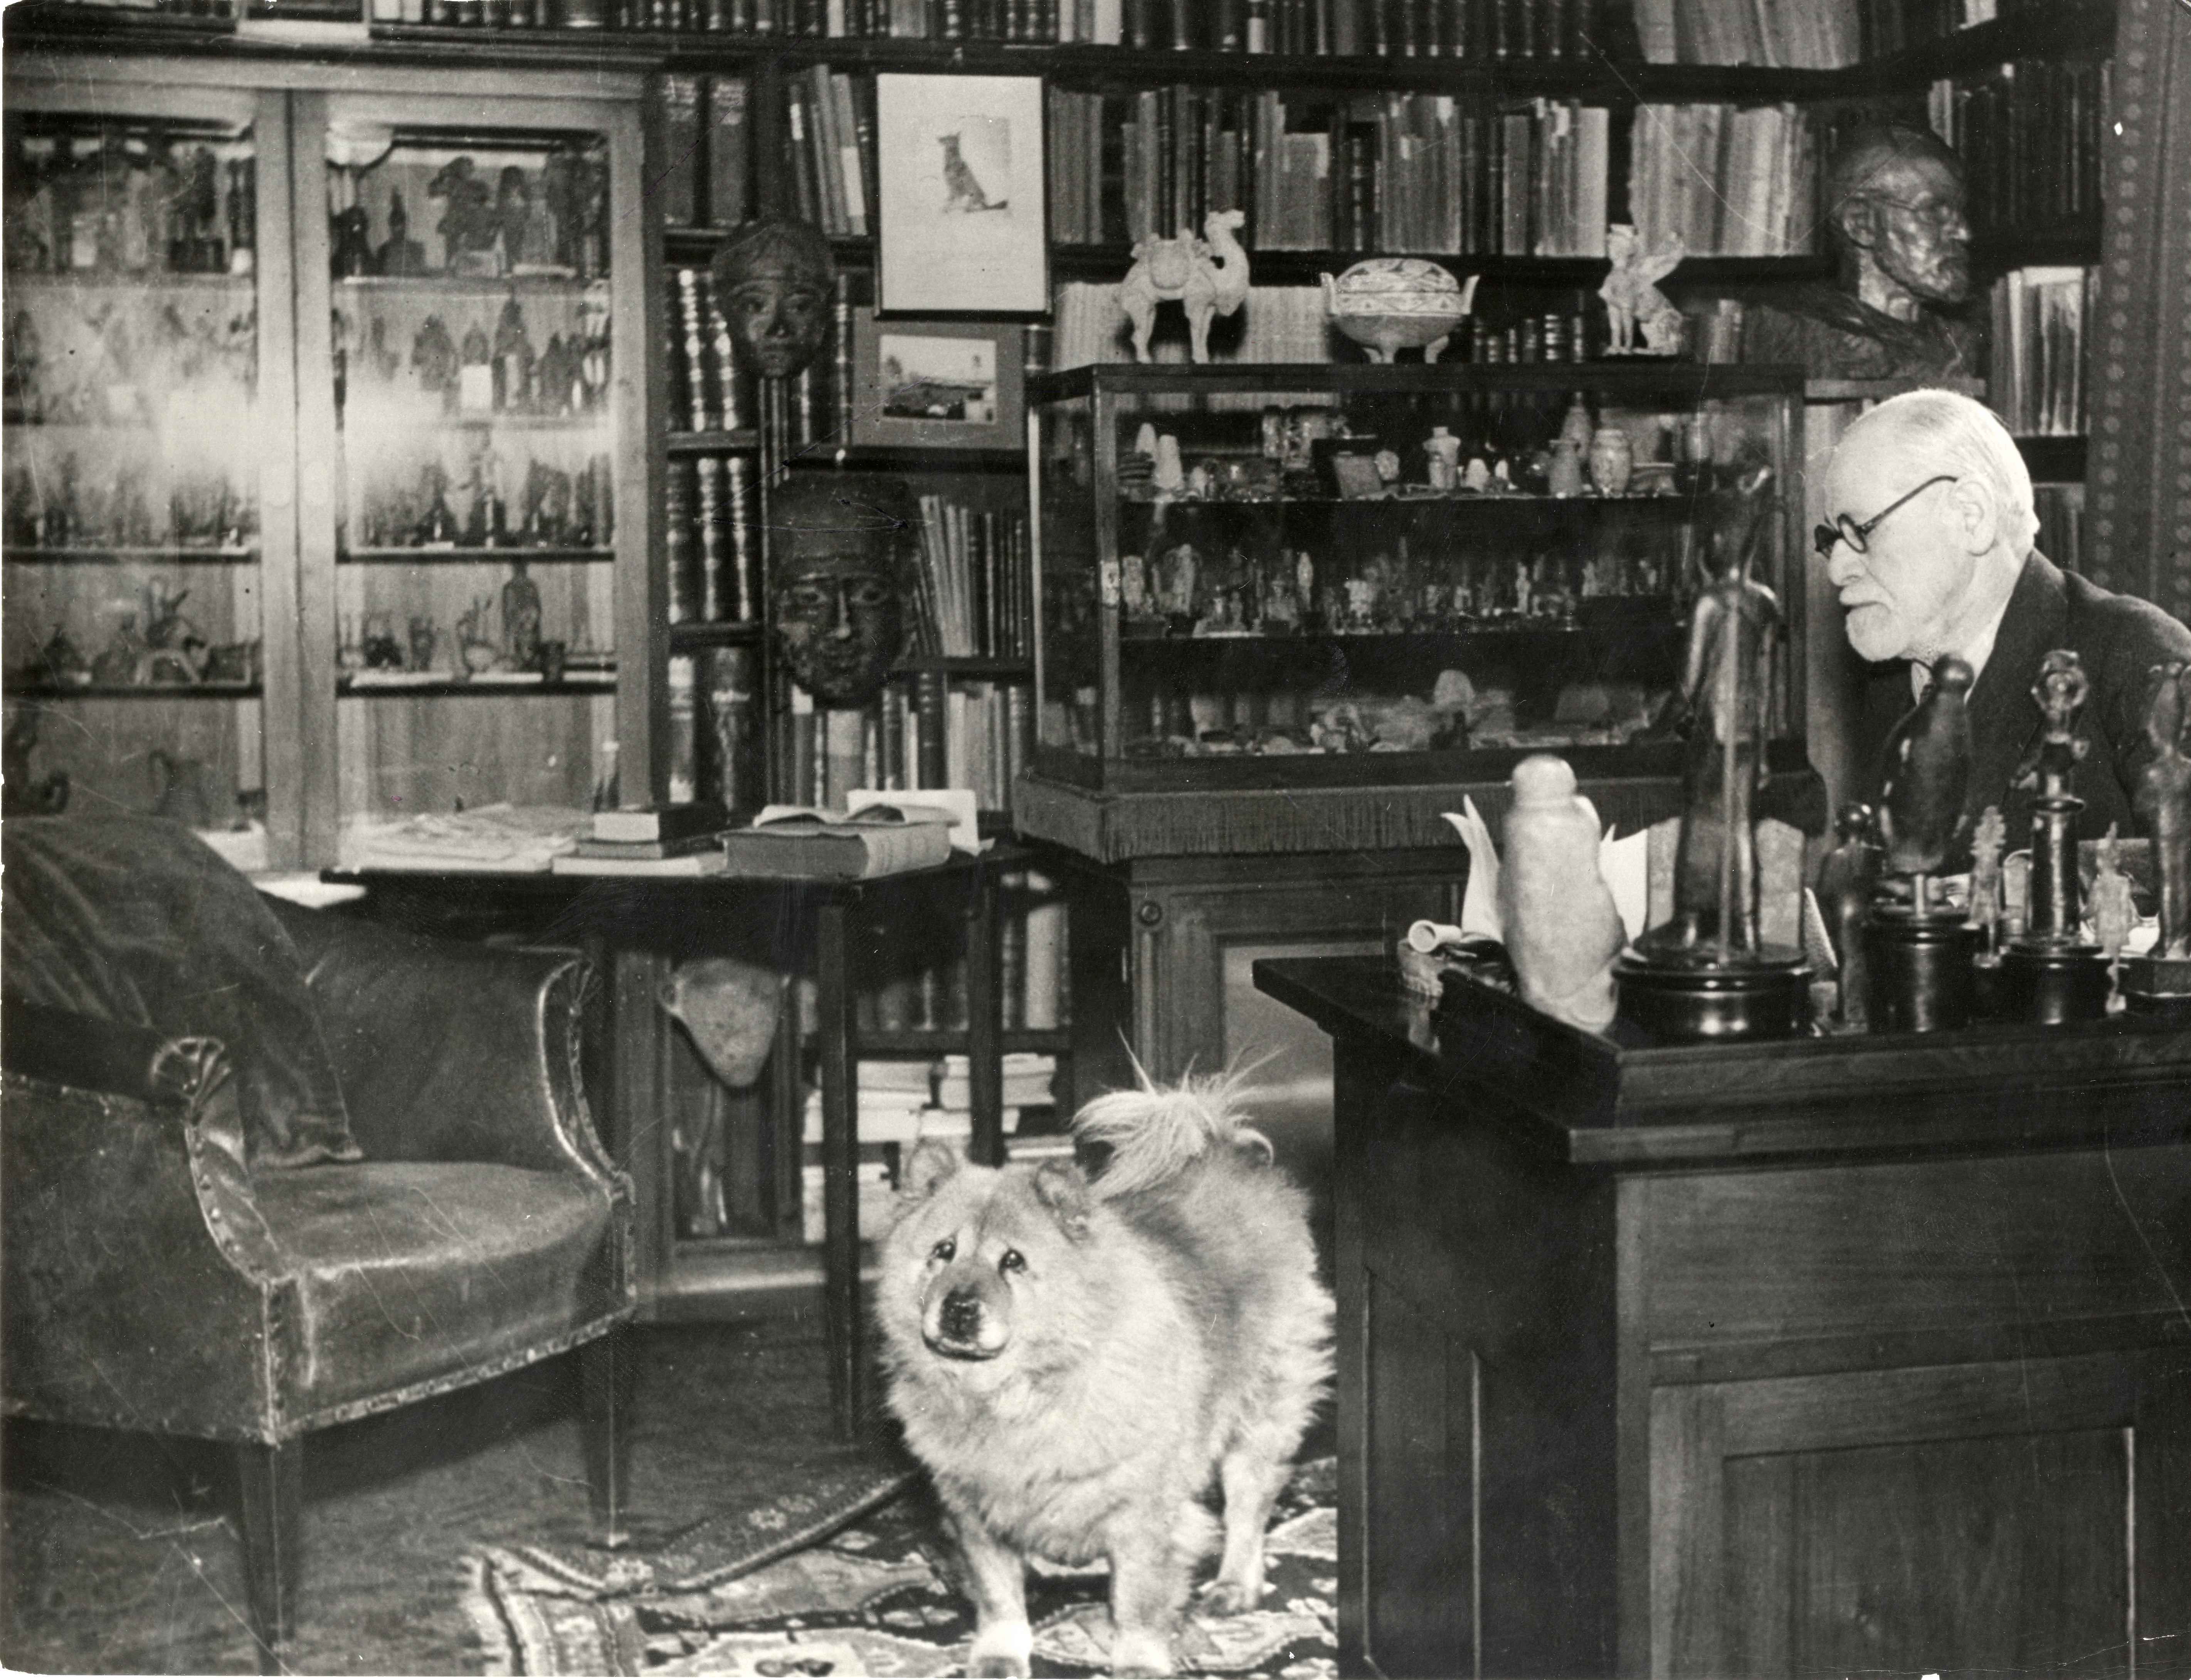 Sigmund Freud in his study with chow, 1937